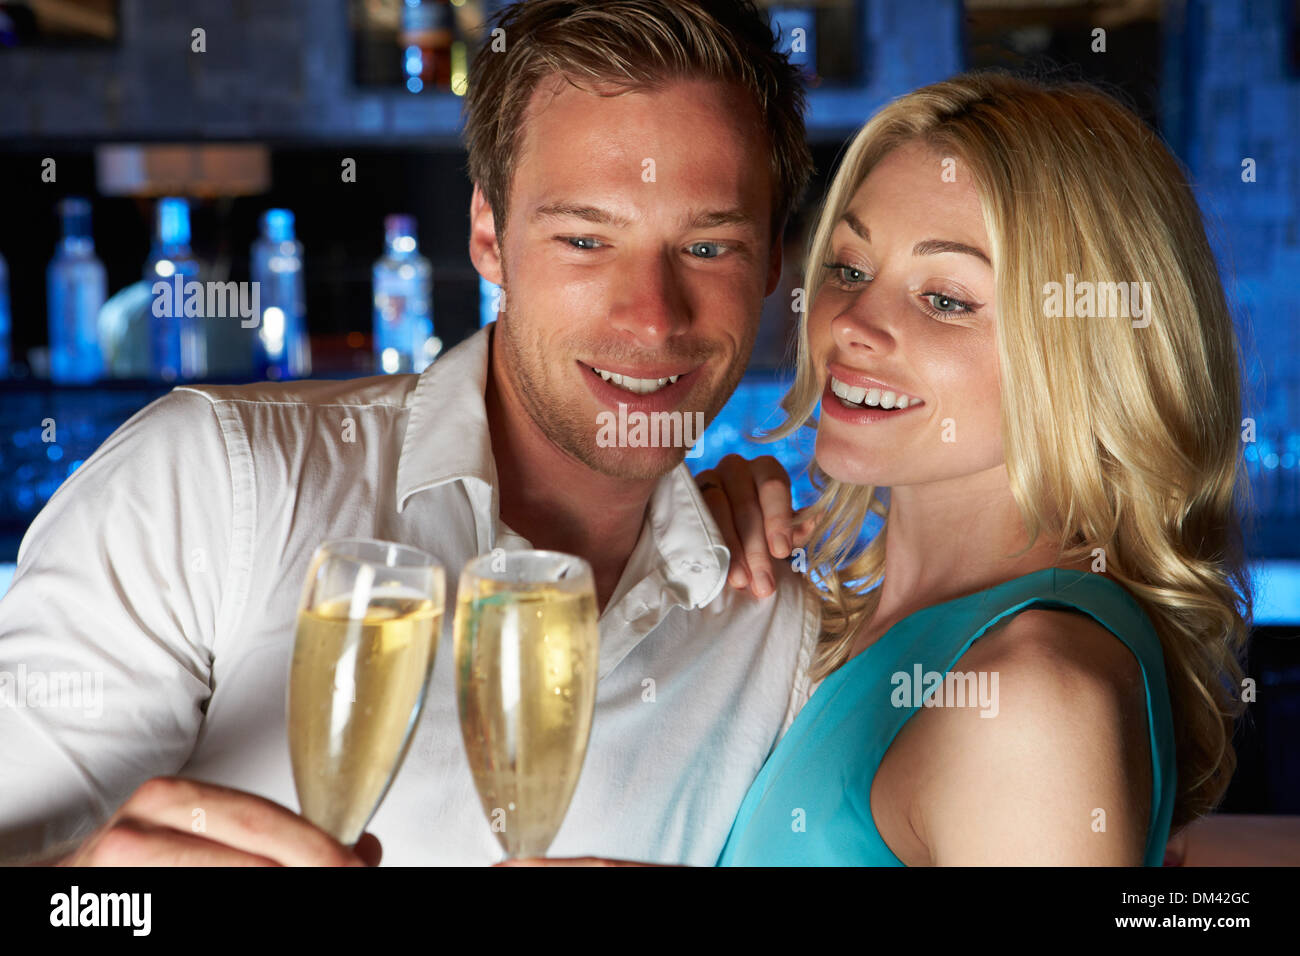 Couple Enjoying Glass Of Champagne In Bar Stock Photo